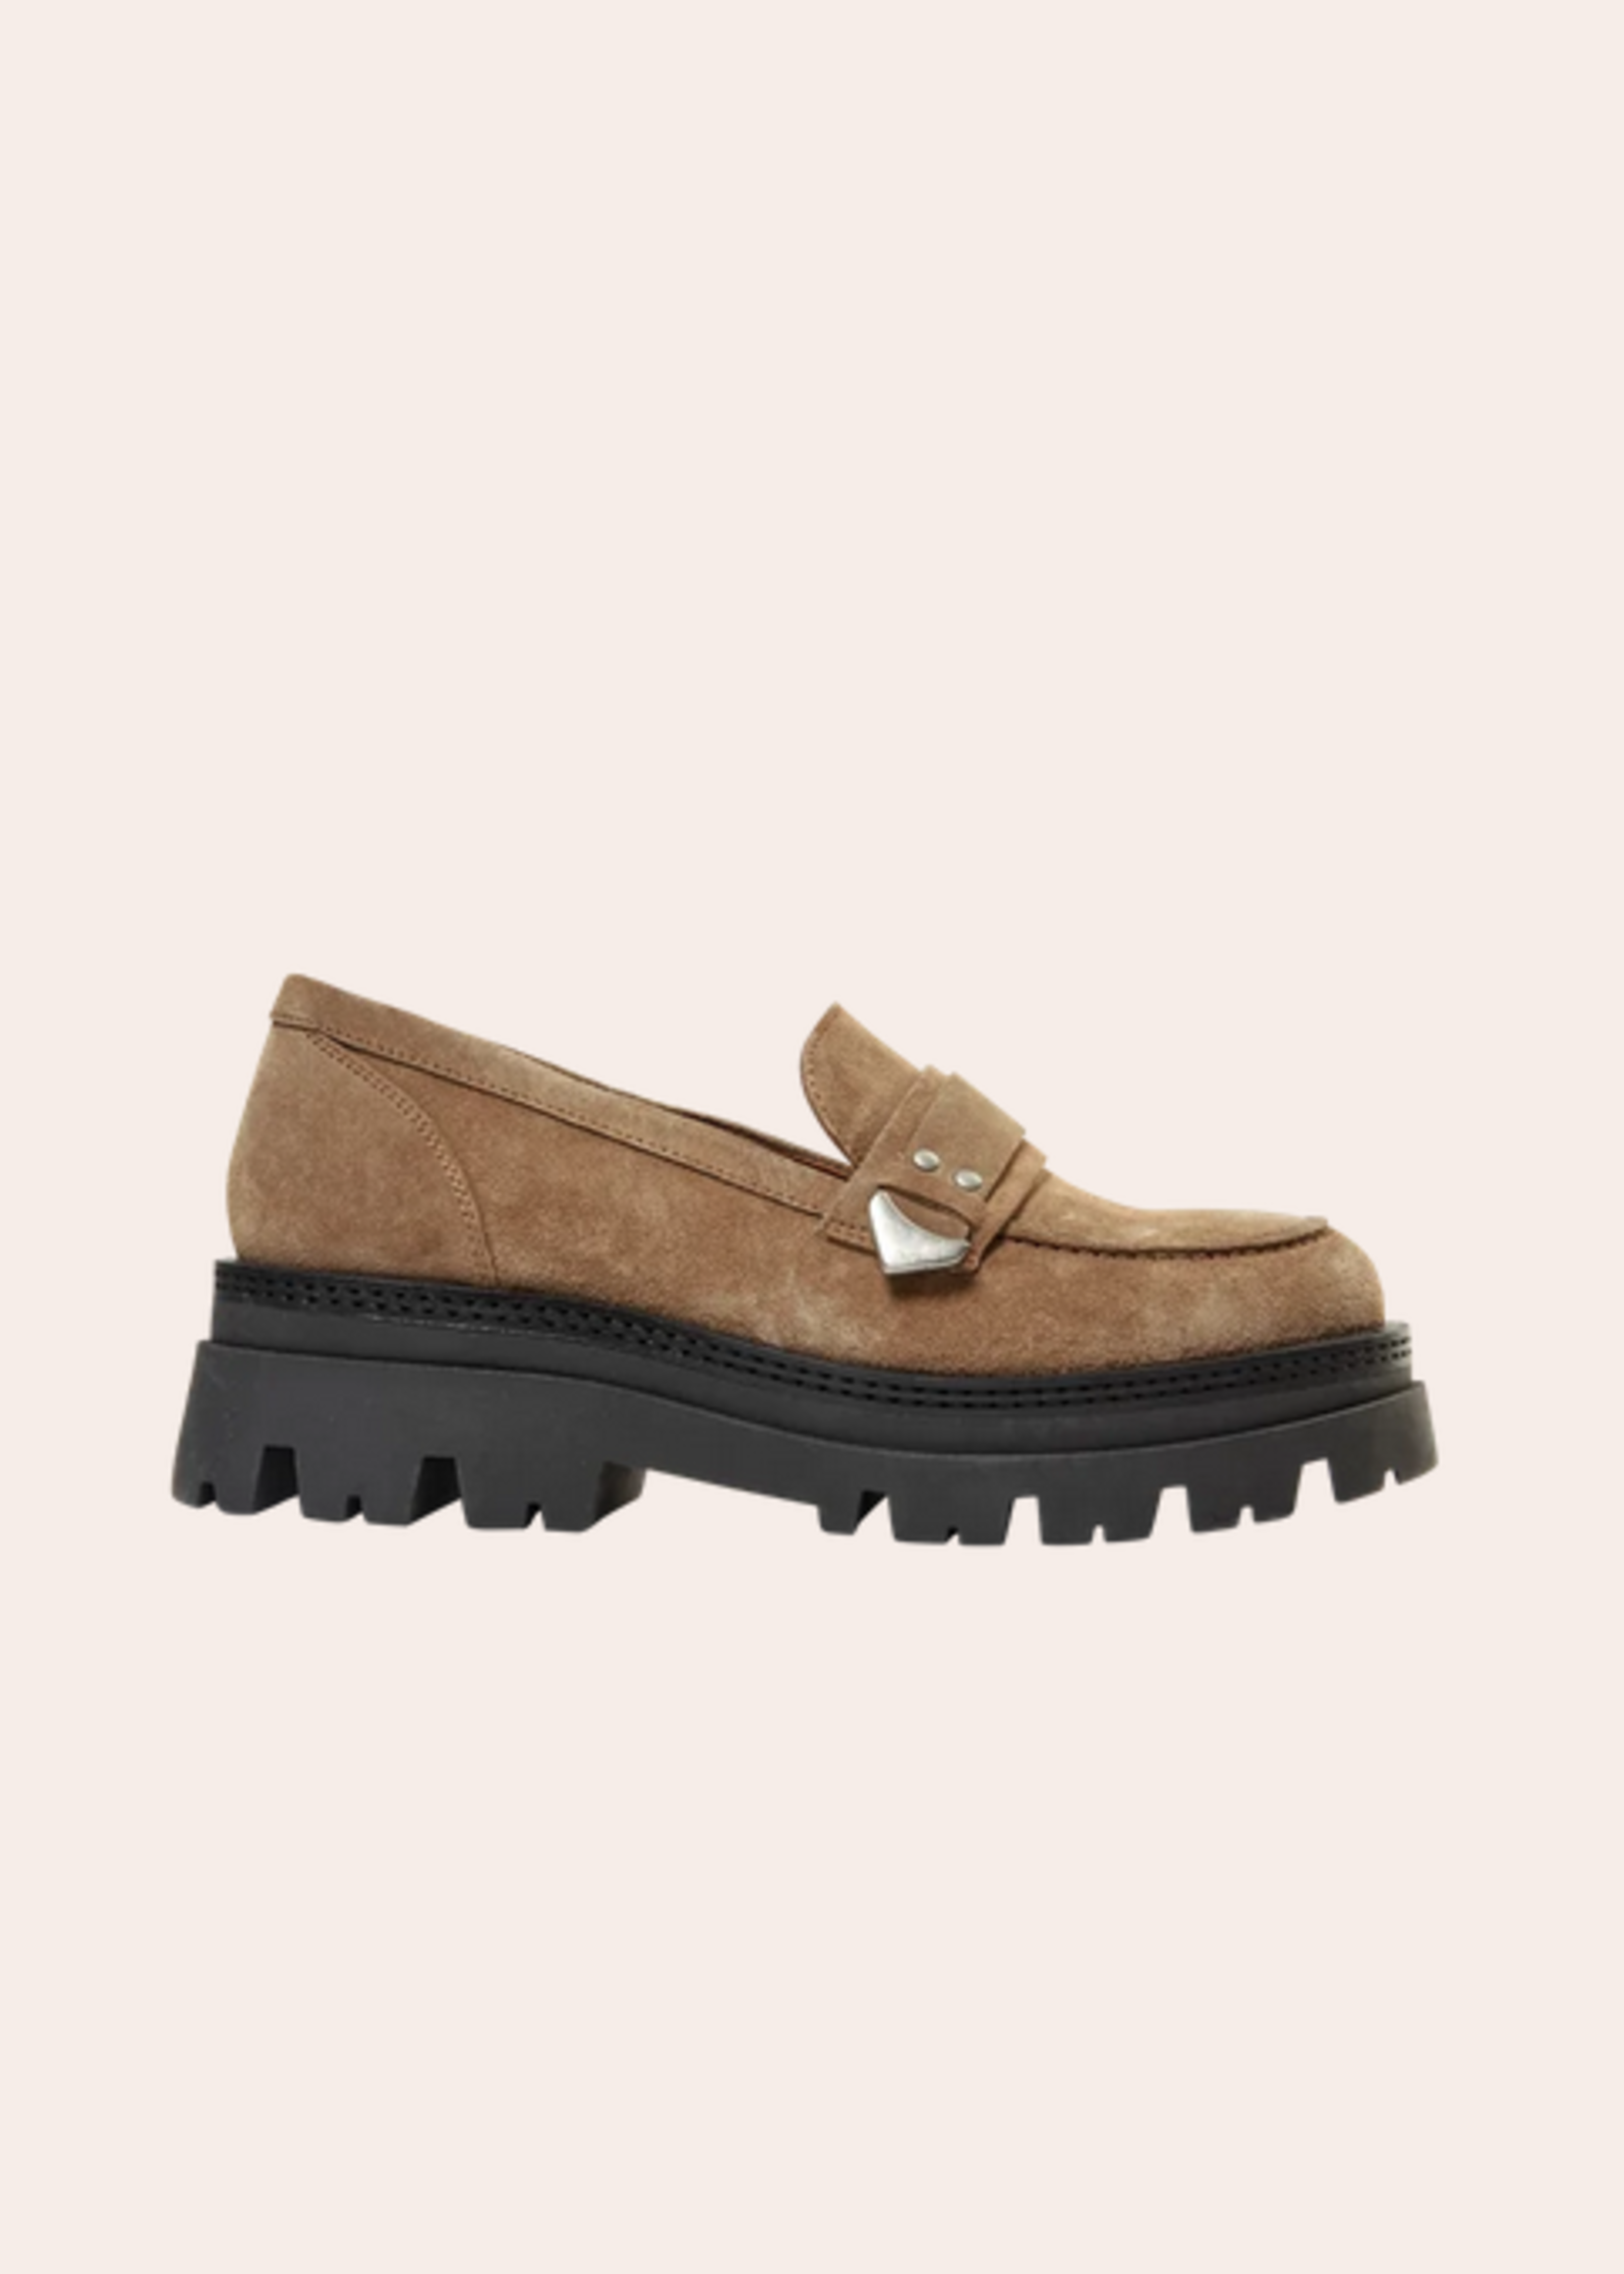 MOS MOSH COSTA RICA SUEDE LOAFER